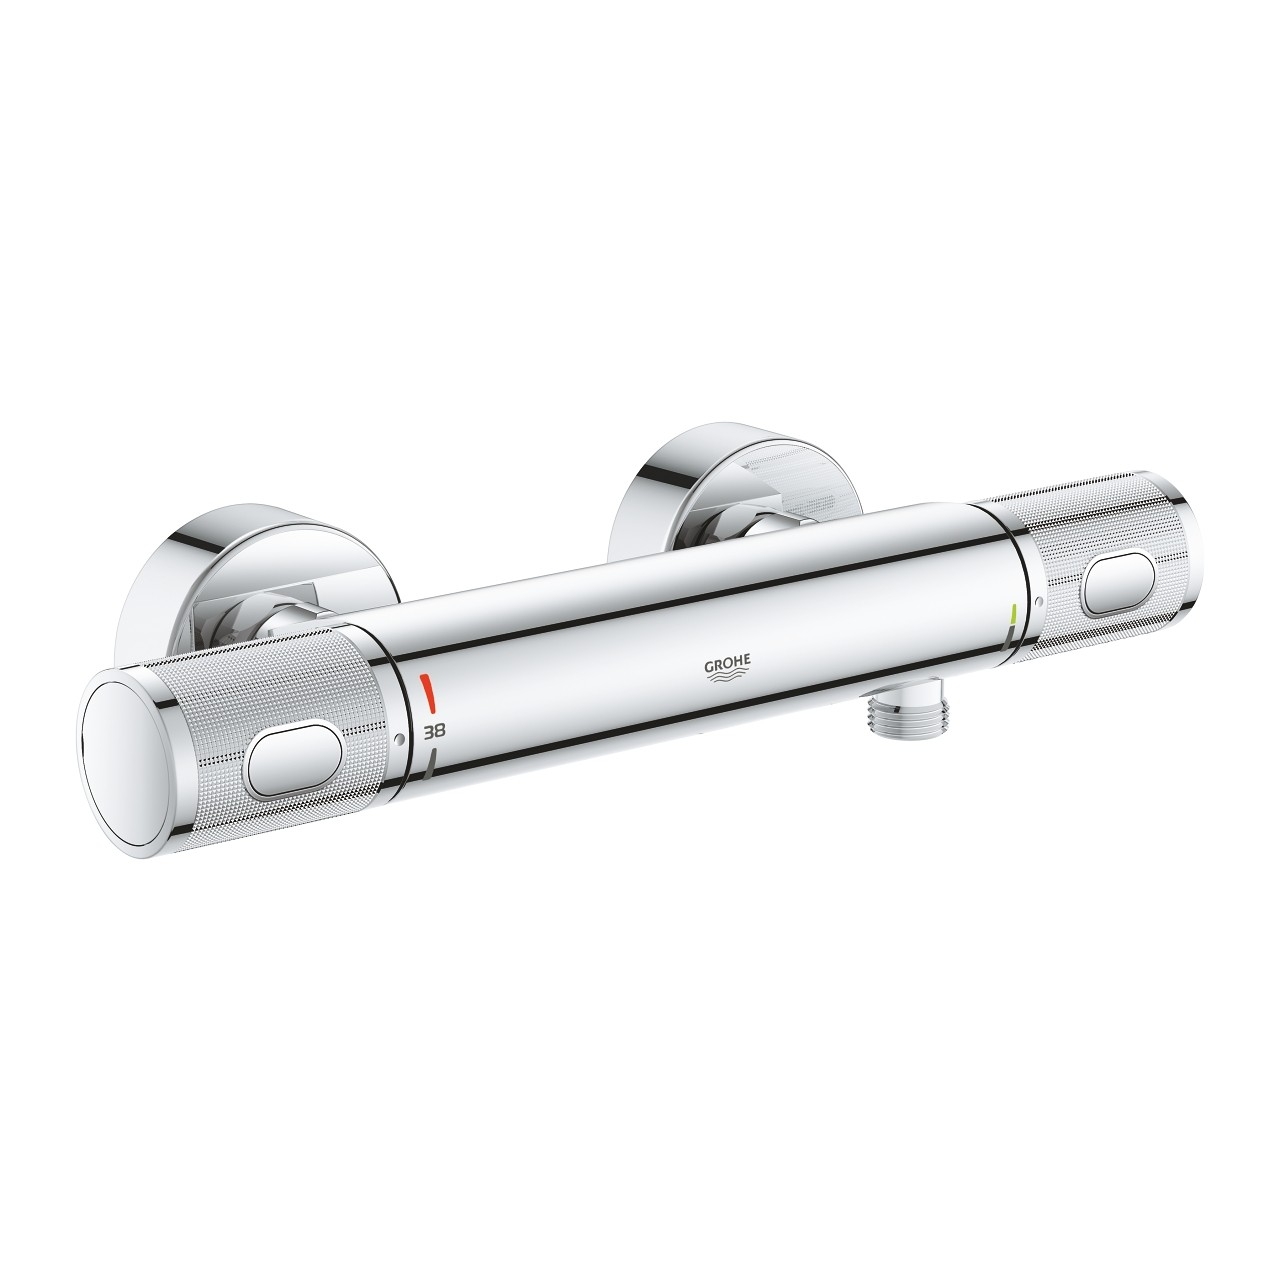 GROHE Grohtherm 1000 Performance bei xTWO